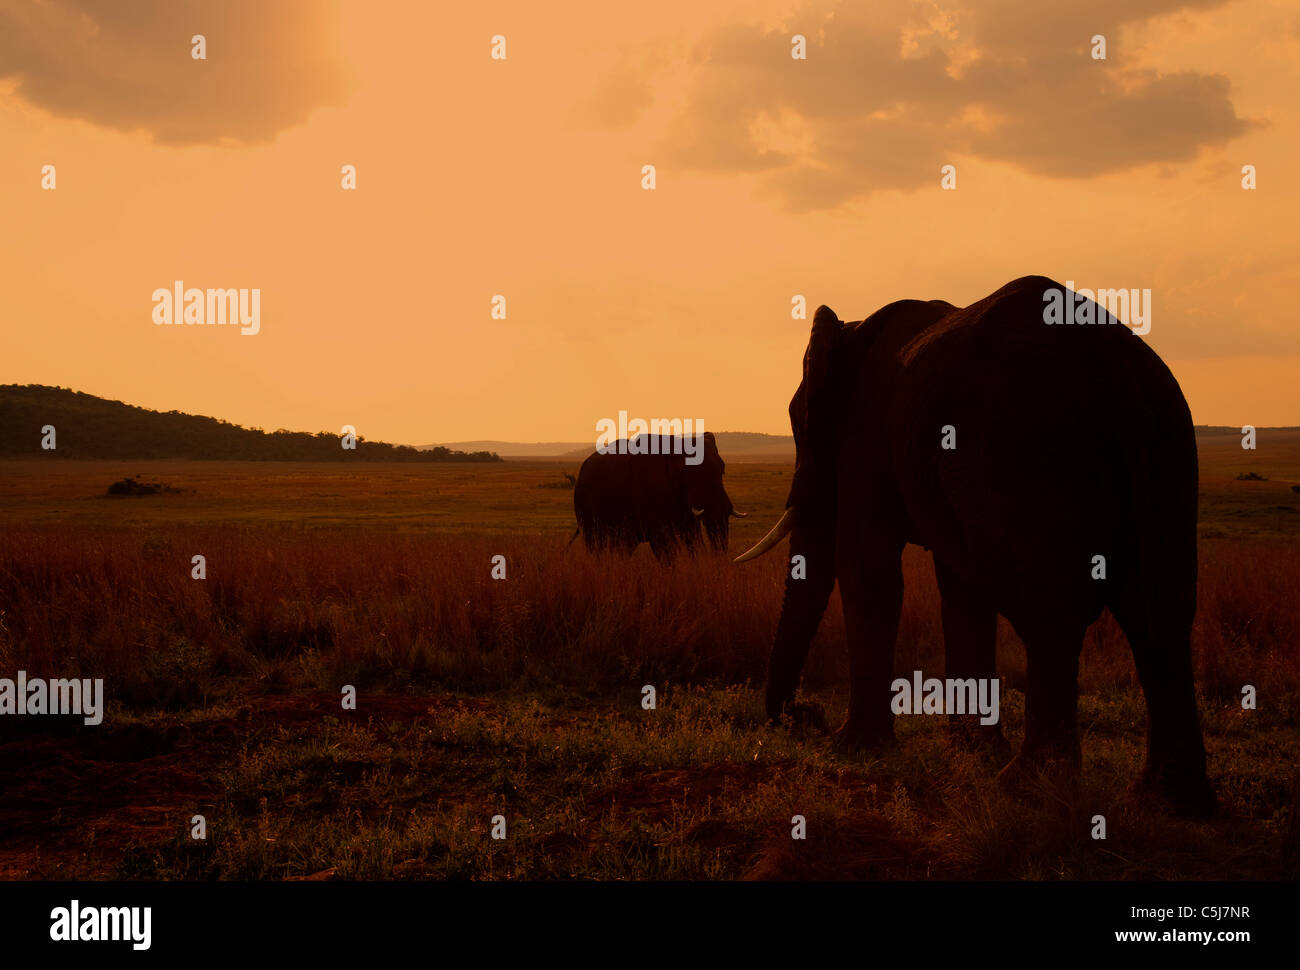 Elephants in Welgevonden game reserve south africa at sunset Stock Photo